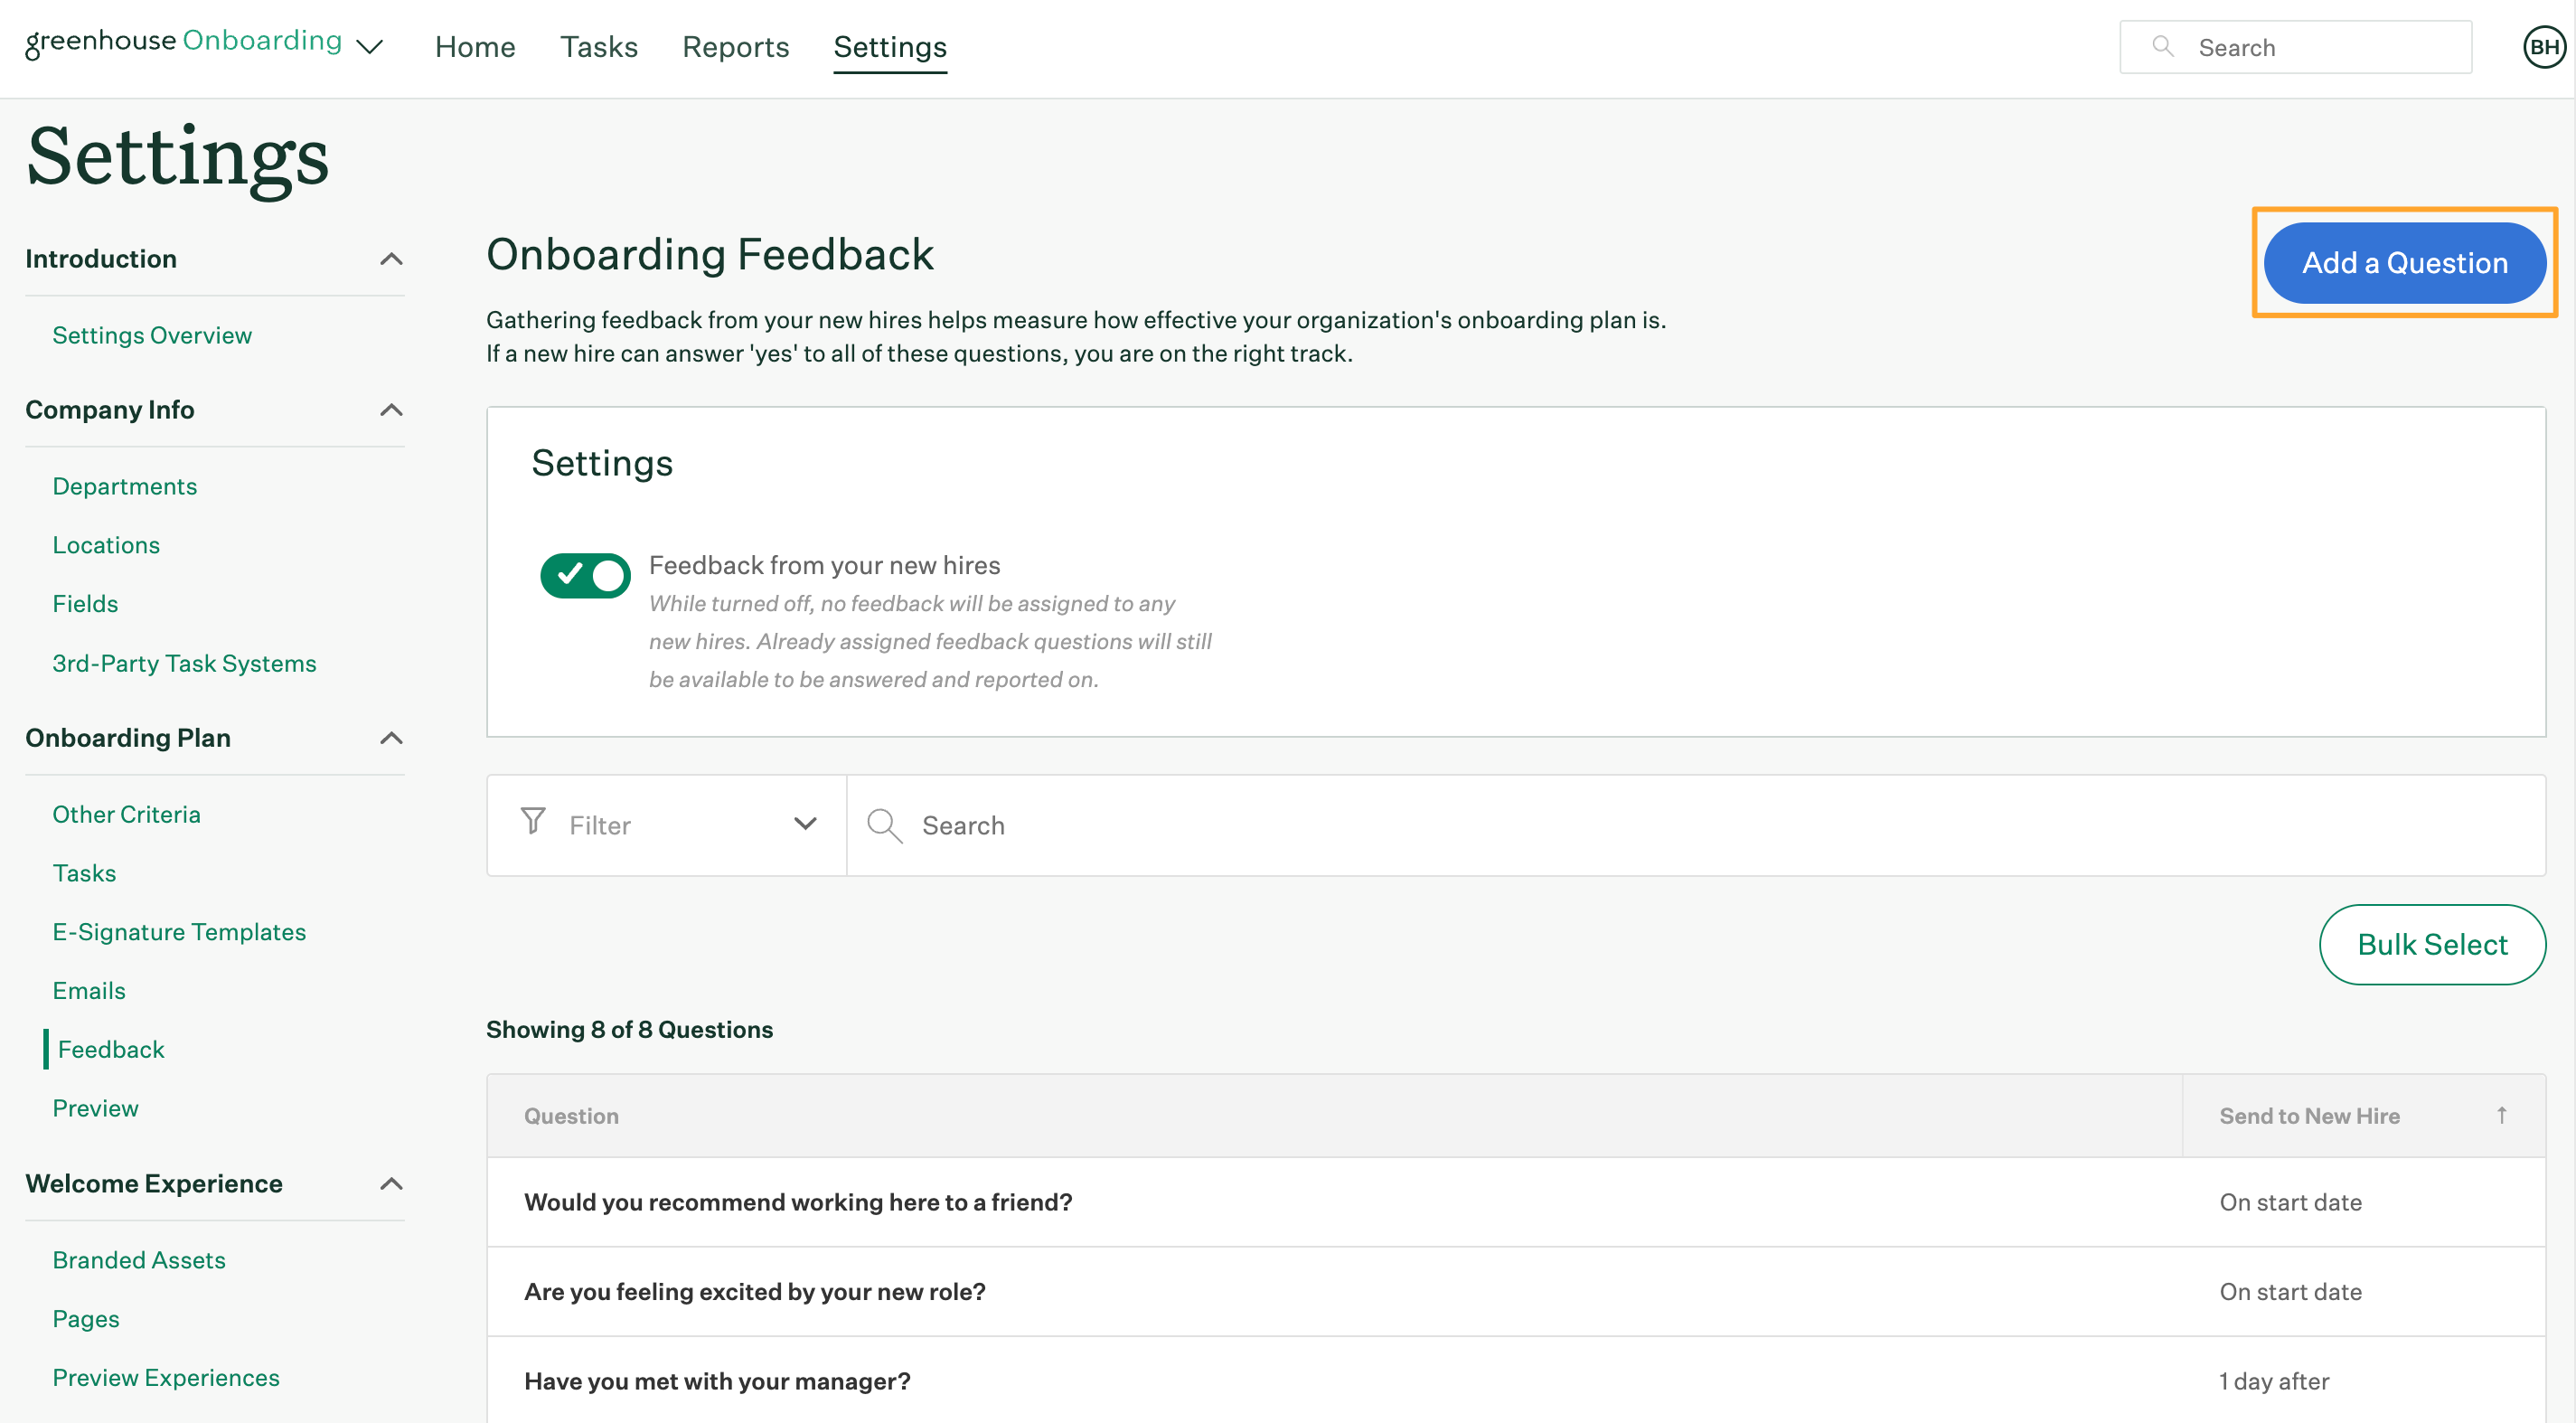 Add-a-question-button-highlighted-on-the-onboarding-feedback-page.png